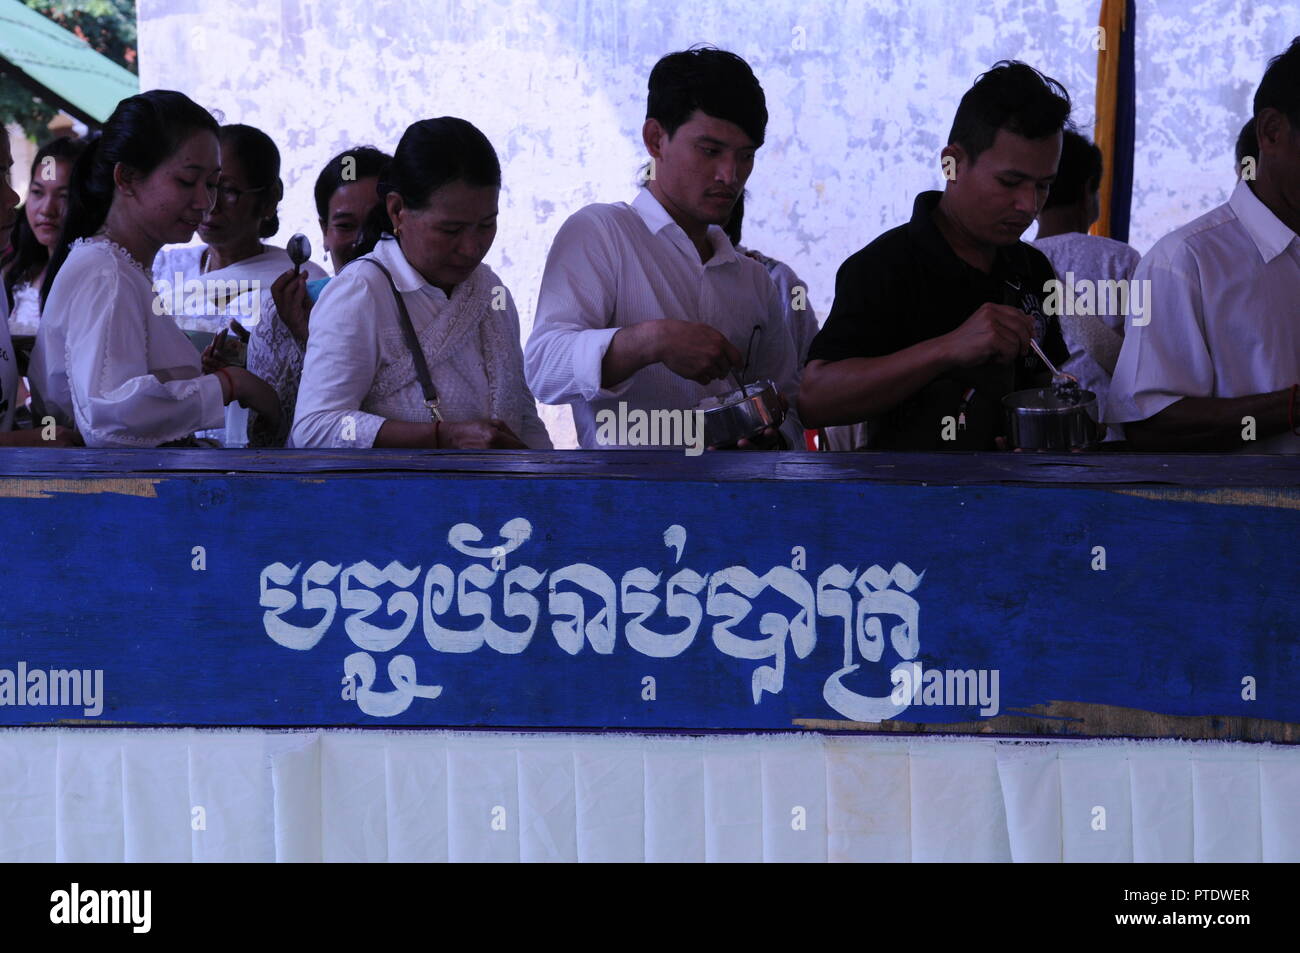 Kandal province, Cambodia. October 9th, 2018. Cambodians donate rice at Wat Prey Veng temple during the Pchum Ben festival, also known as 'Ancestors' Day'. Credit: Kraig Lieb / Alamy Live News Stock Photo